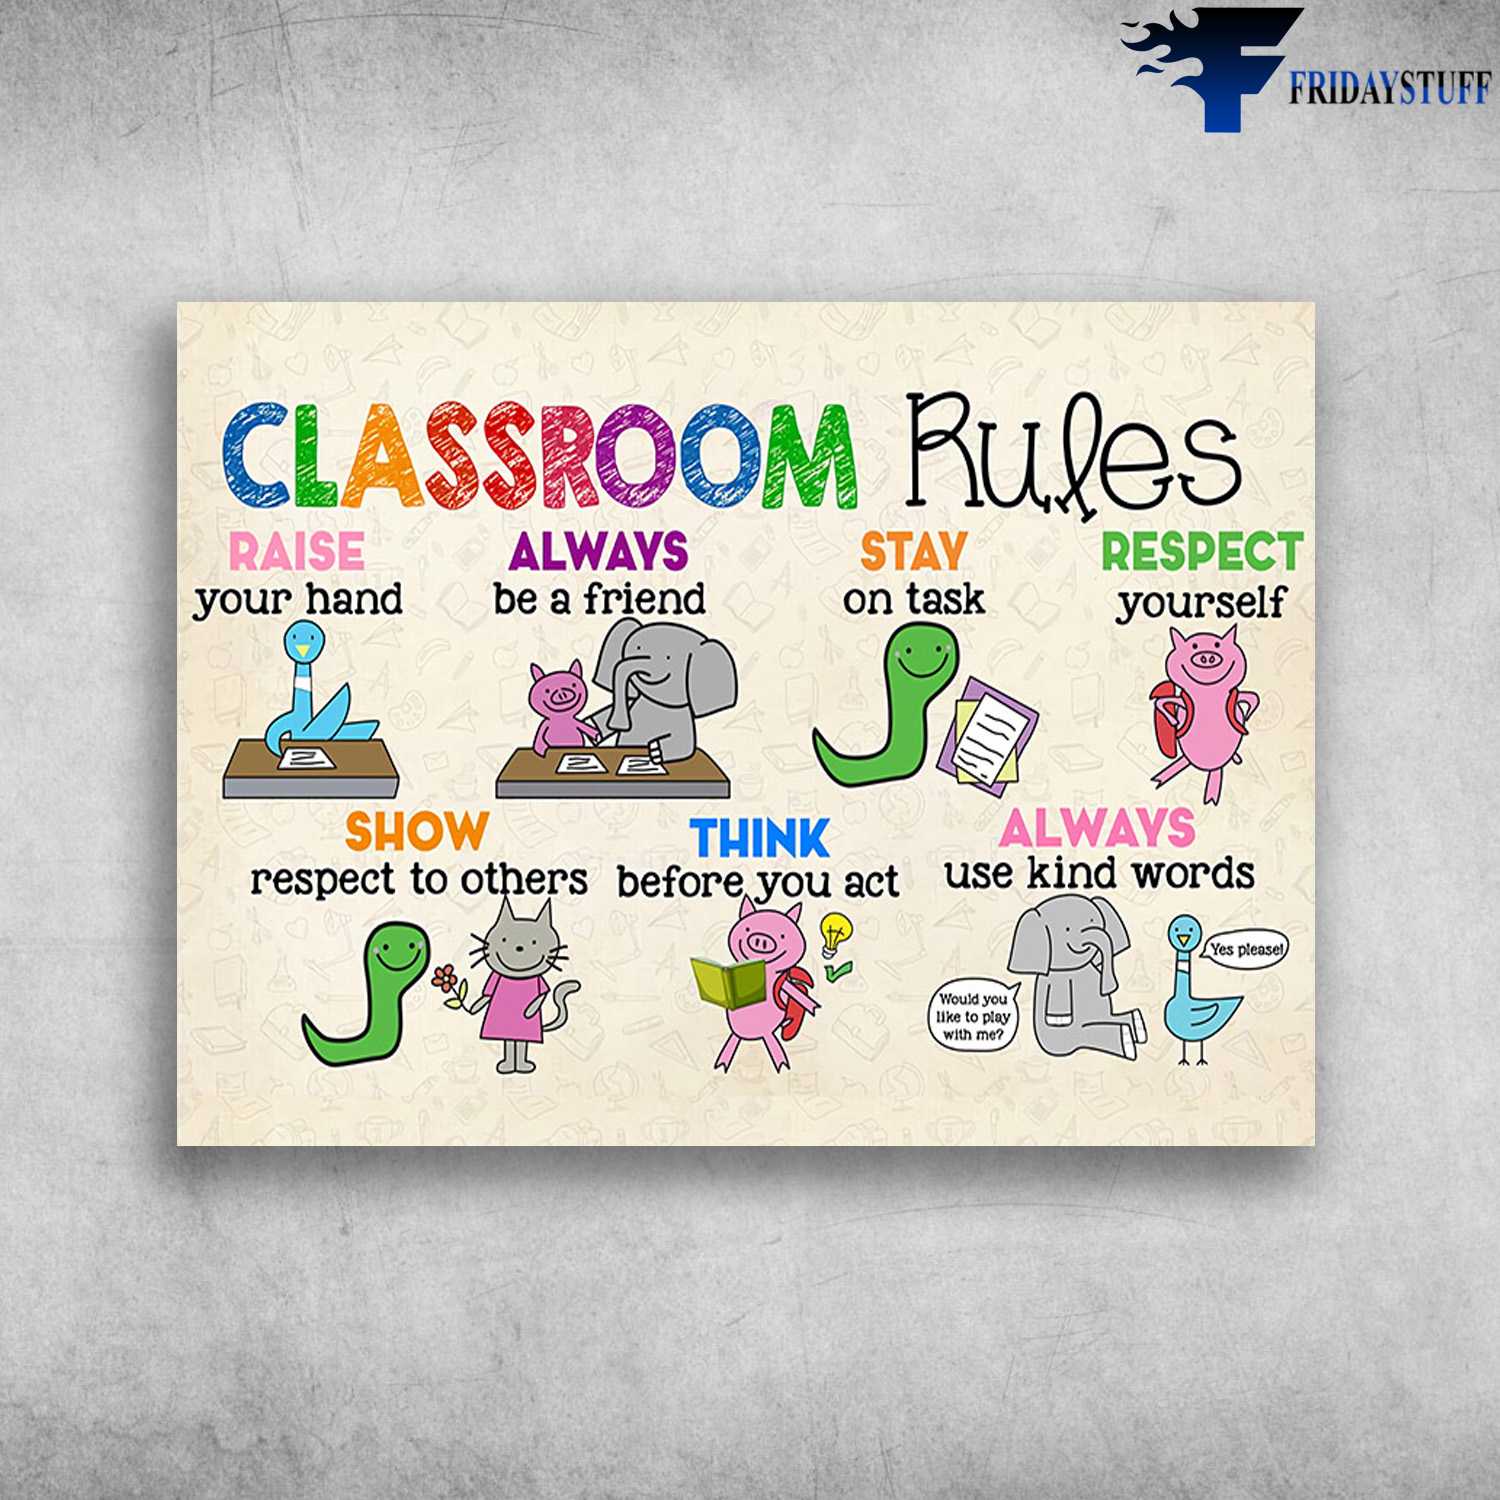 Classroom Rules, Back To School - Raise Your Hand, Always Be A Friend, Stay On Task, Respect Yourself, Show Respect To Others, Think Before You Act, Always Use Kind Words